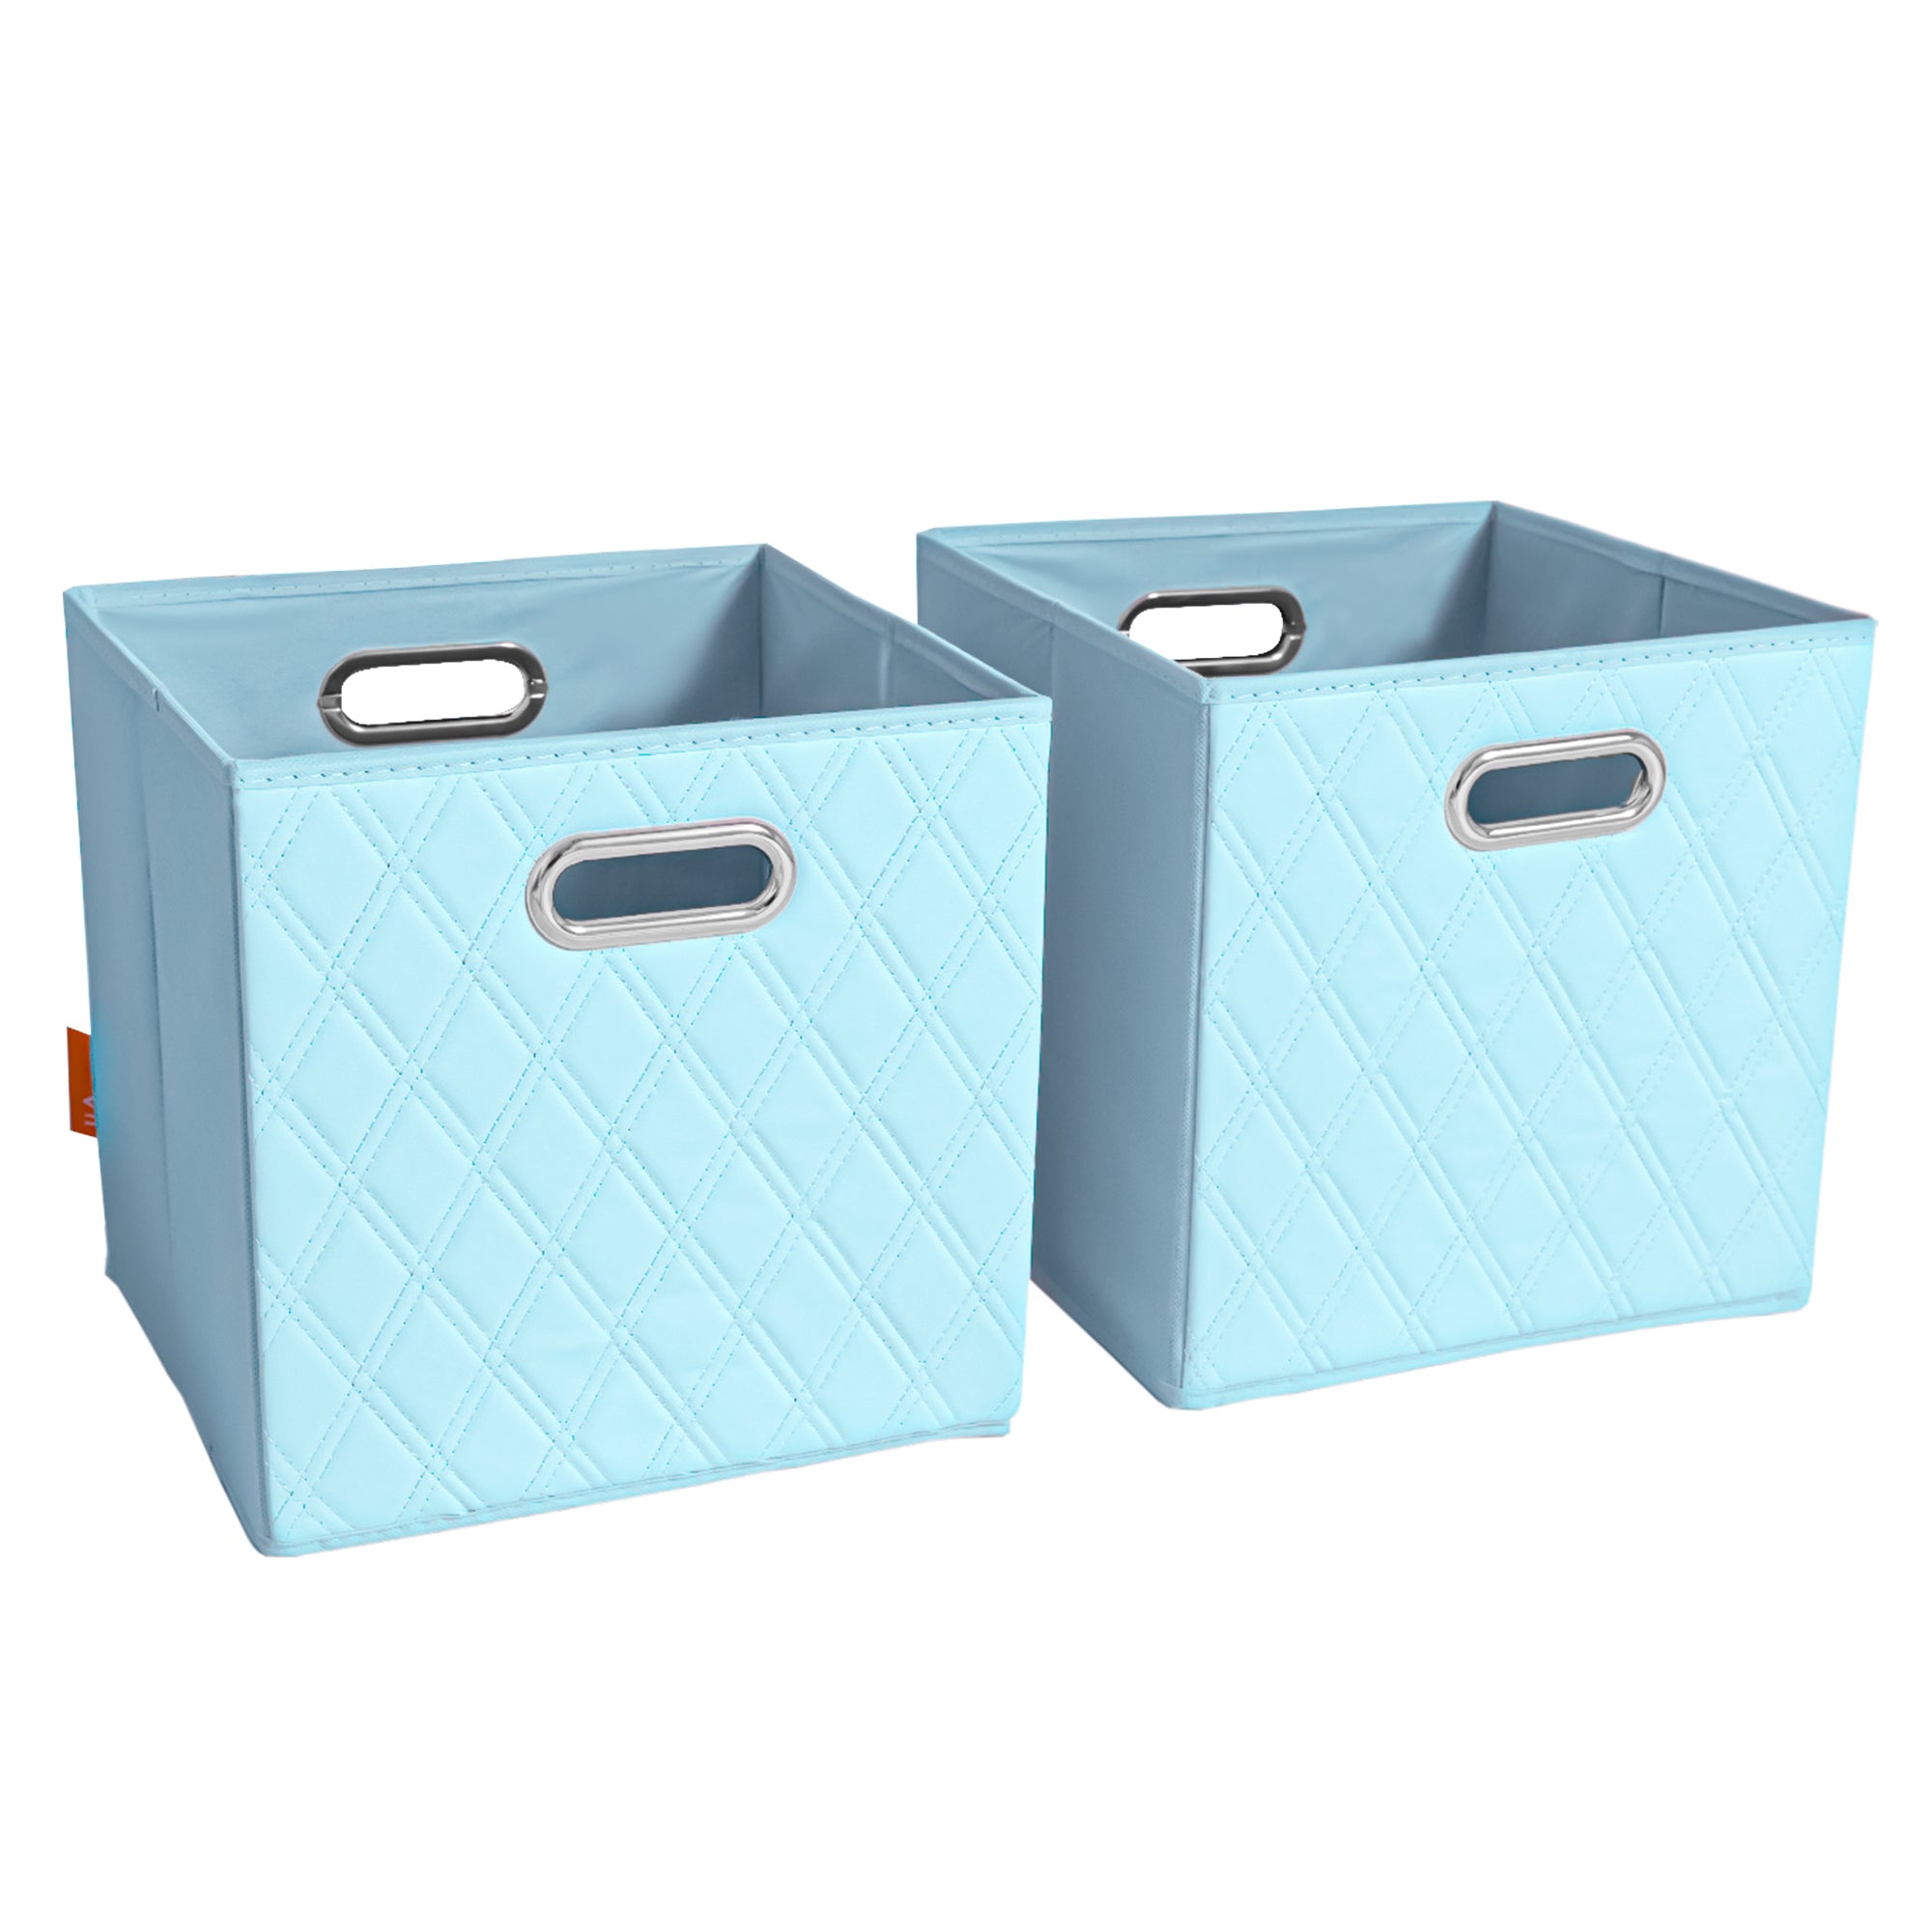 JIAessentials 13 inch Foldable Diamond Patterned Faux Leather Storage Cube Bins Set of Two with Dual Handles - 13" Blue